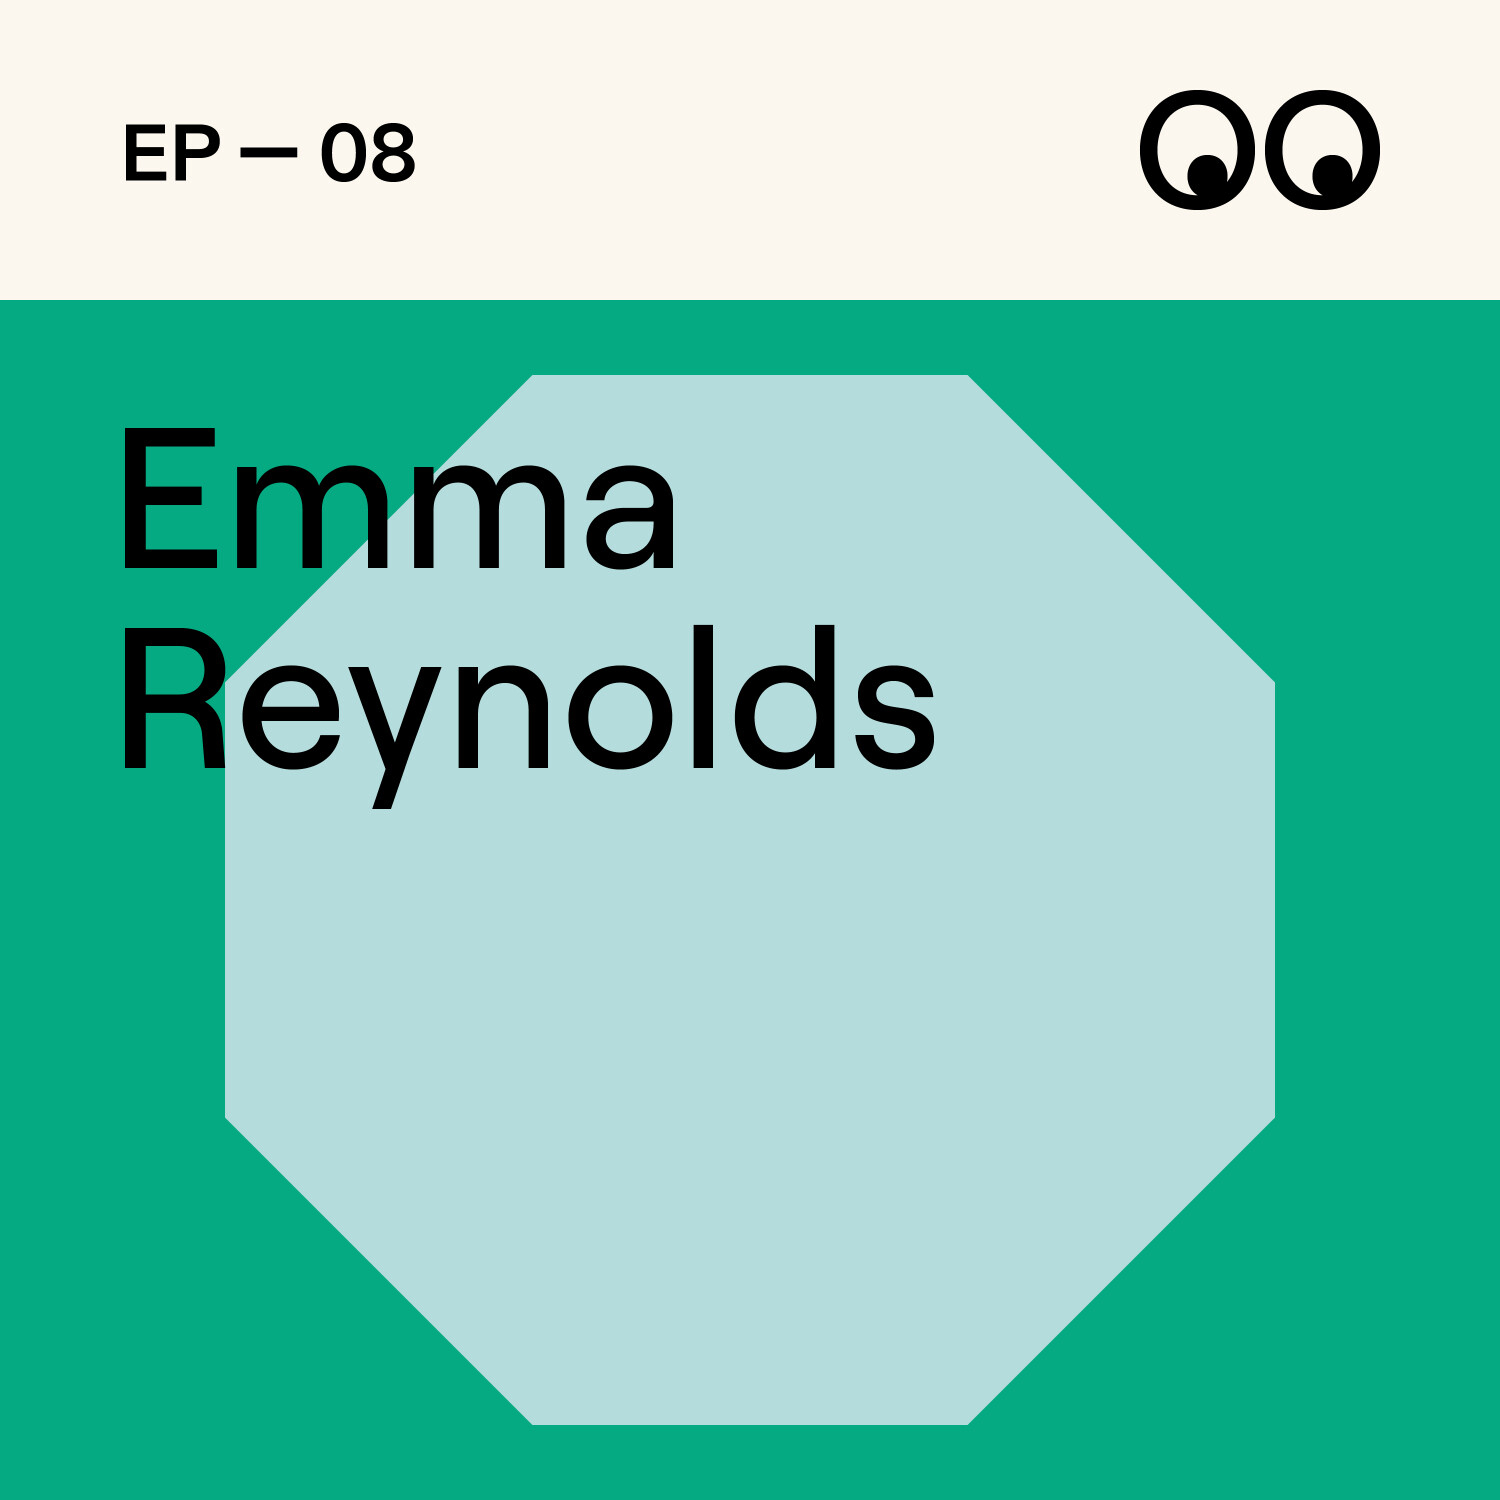 Starting a global eco movement through illustration, with Emma Reynolds